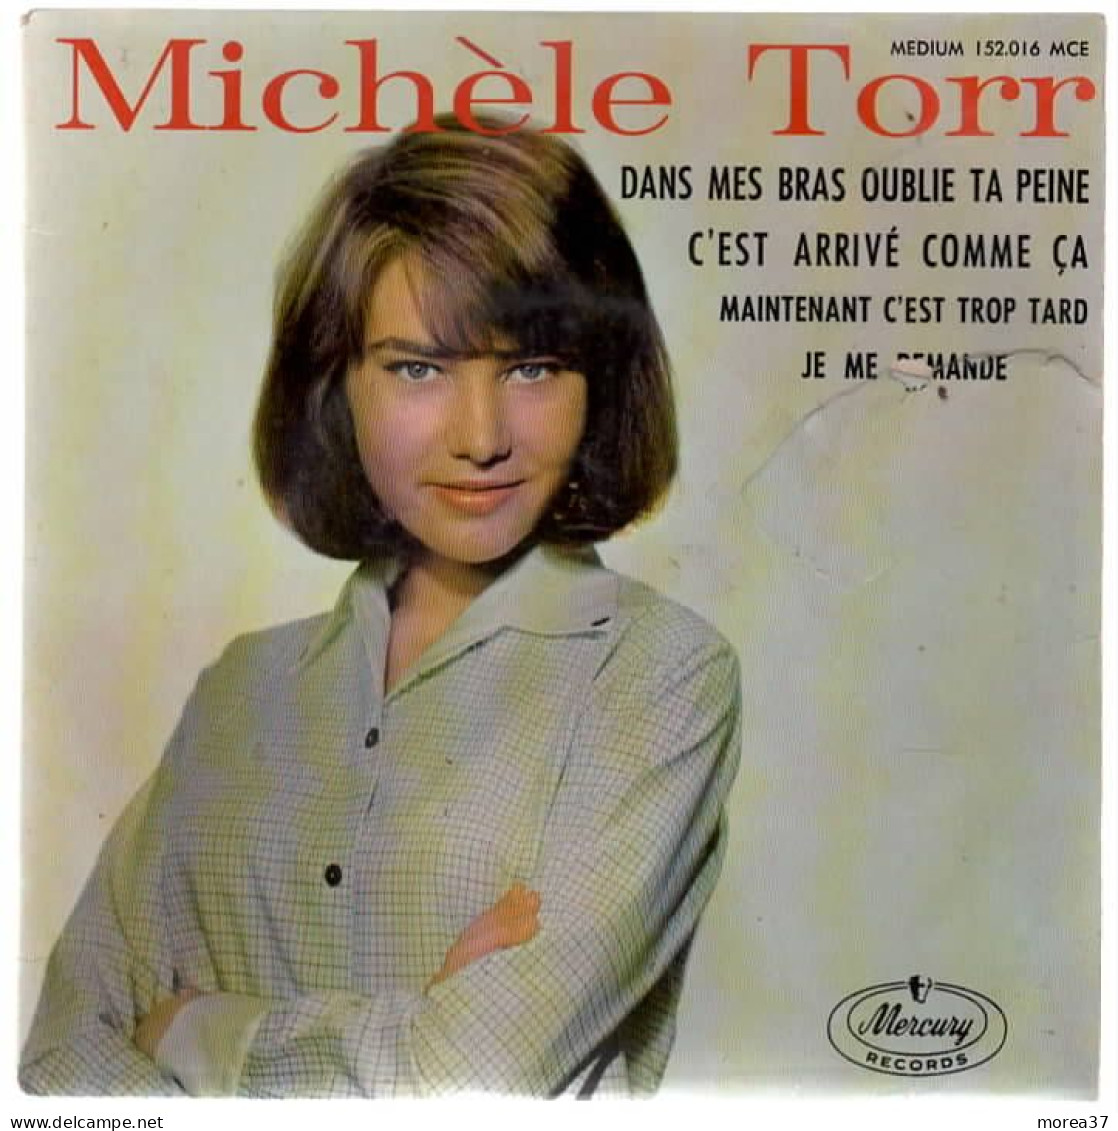 MICHELE TORR  Dans Mes Bras Oublie Ta Peine    MERCURY RECORD  152.016 MCE - Other - French Music